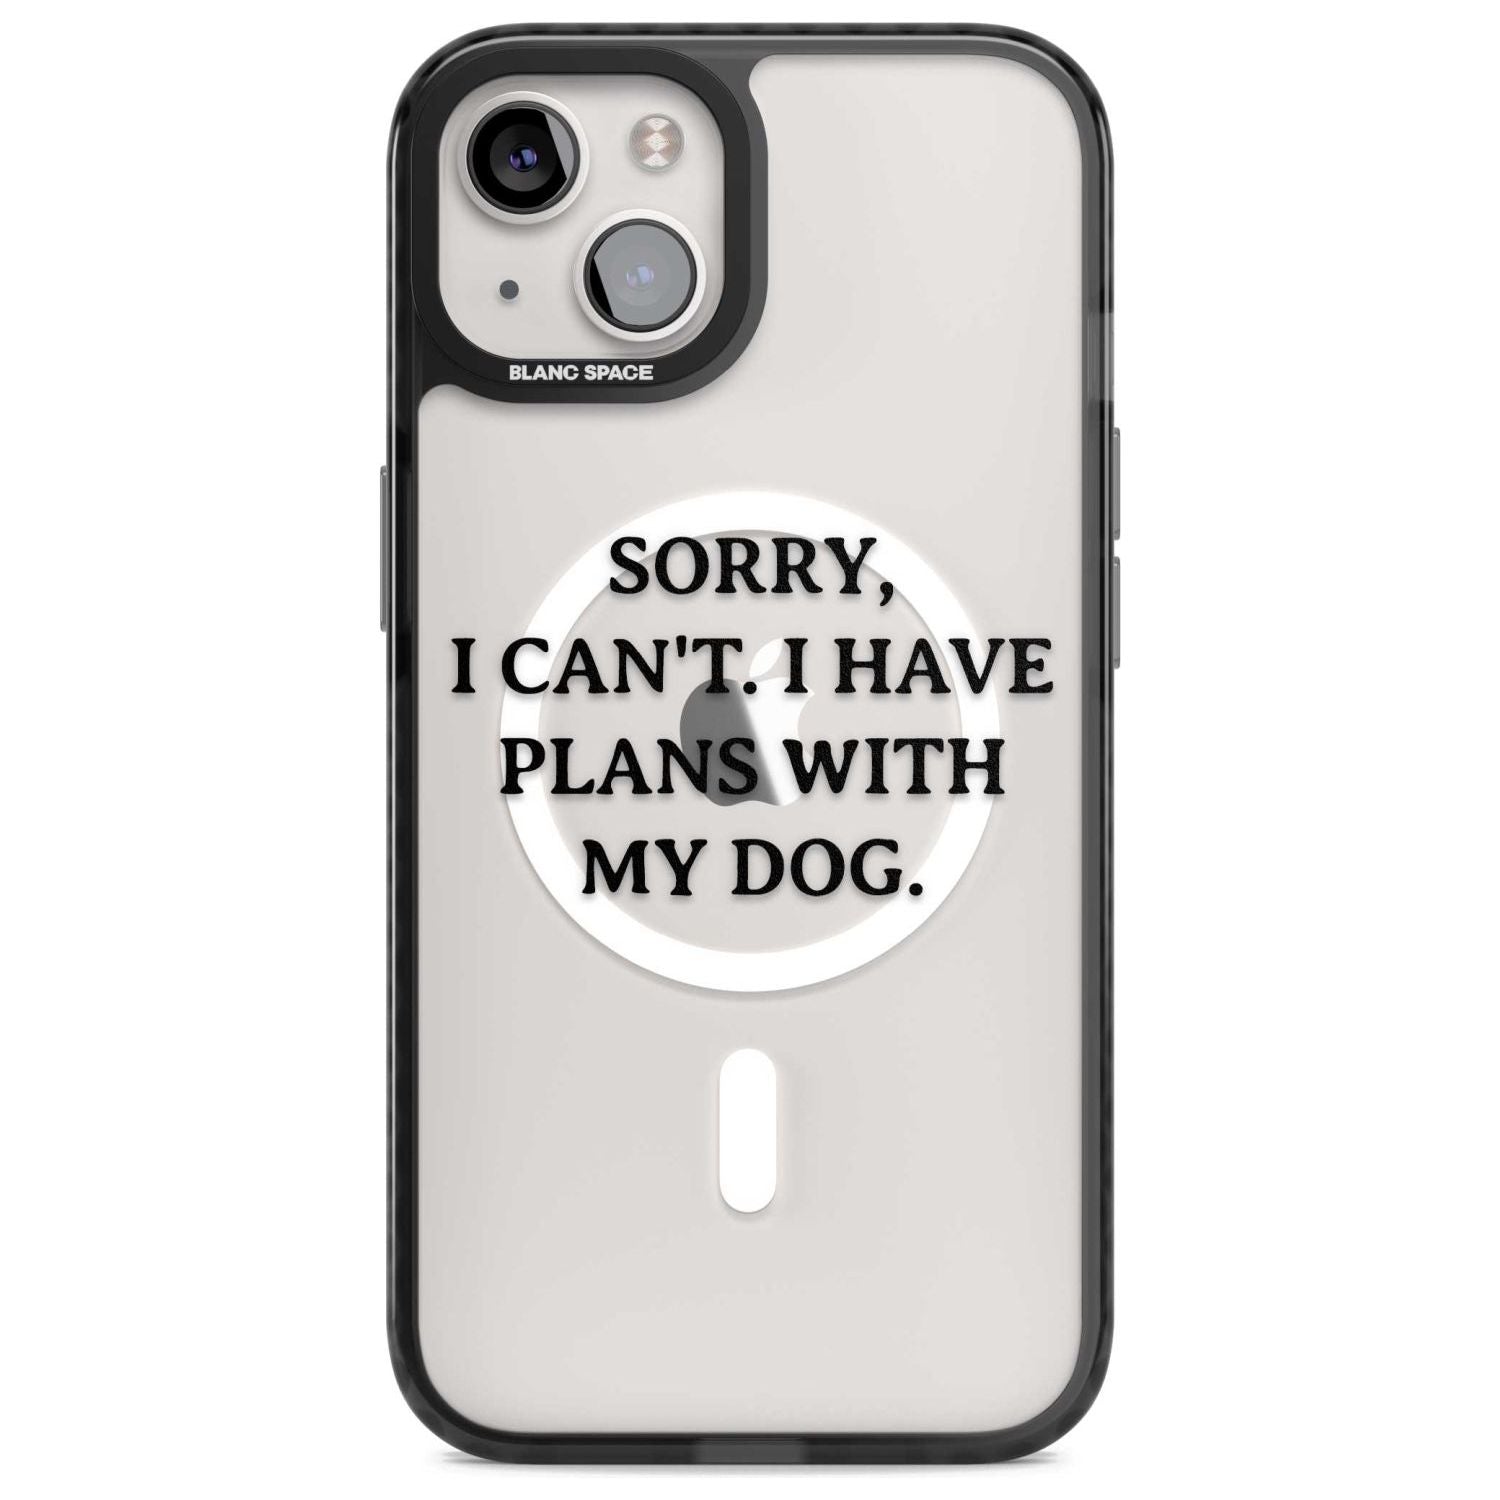 I Have Plans With My Dog Phone Case iPhone 15 Plus / Magsafe Black Impact Case,iPhone 15 / Magsafe Black Impact Case,iPhone 14 Plus / Magsafe Black Impact Case,iPhone 14 / Magsafe Black Impact Case,iPhone 13 / Magsafe Black Impact Case Blanc Space